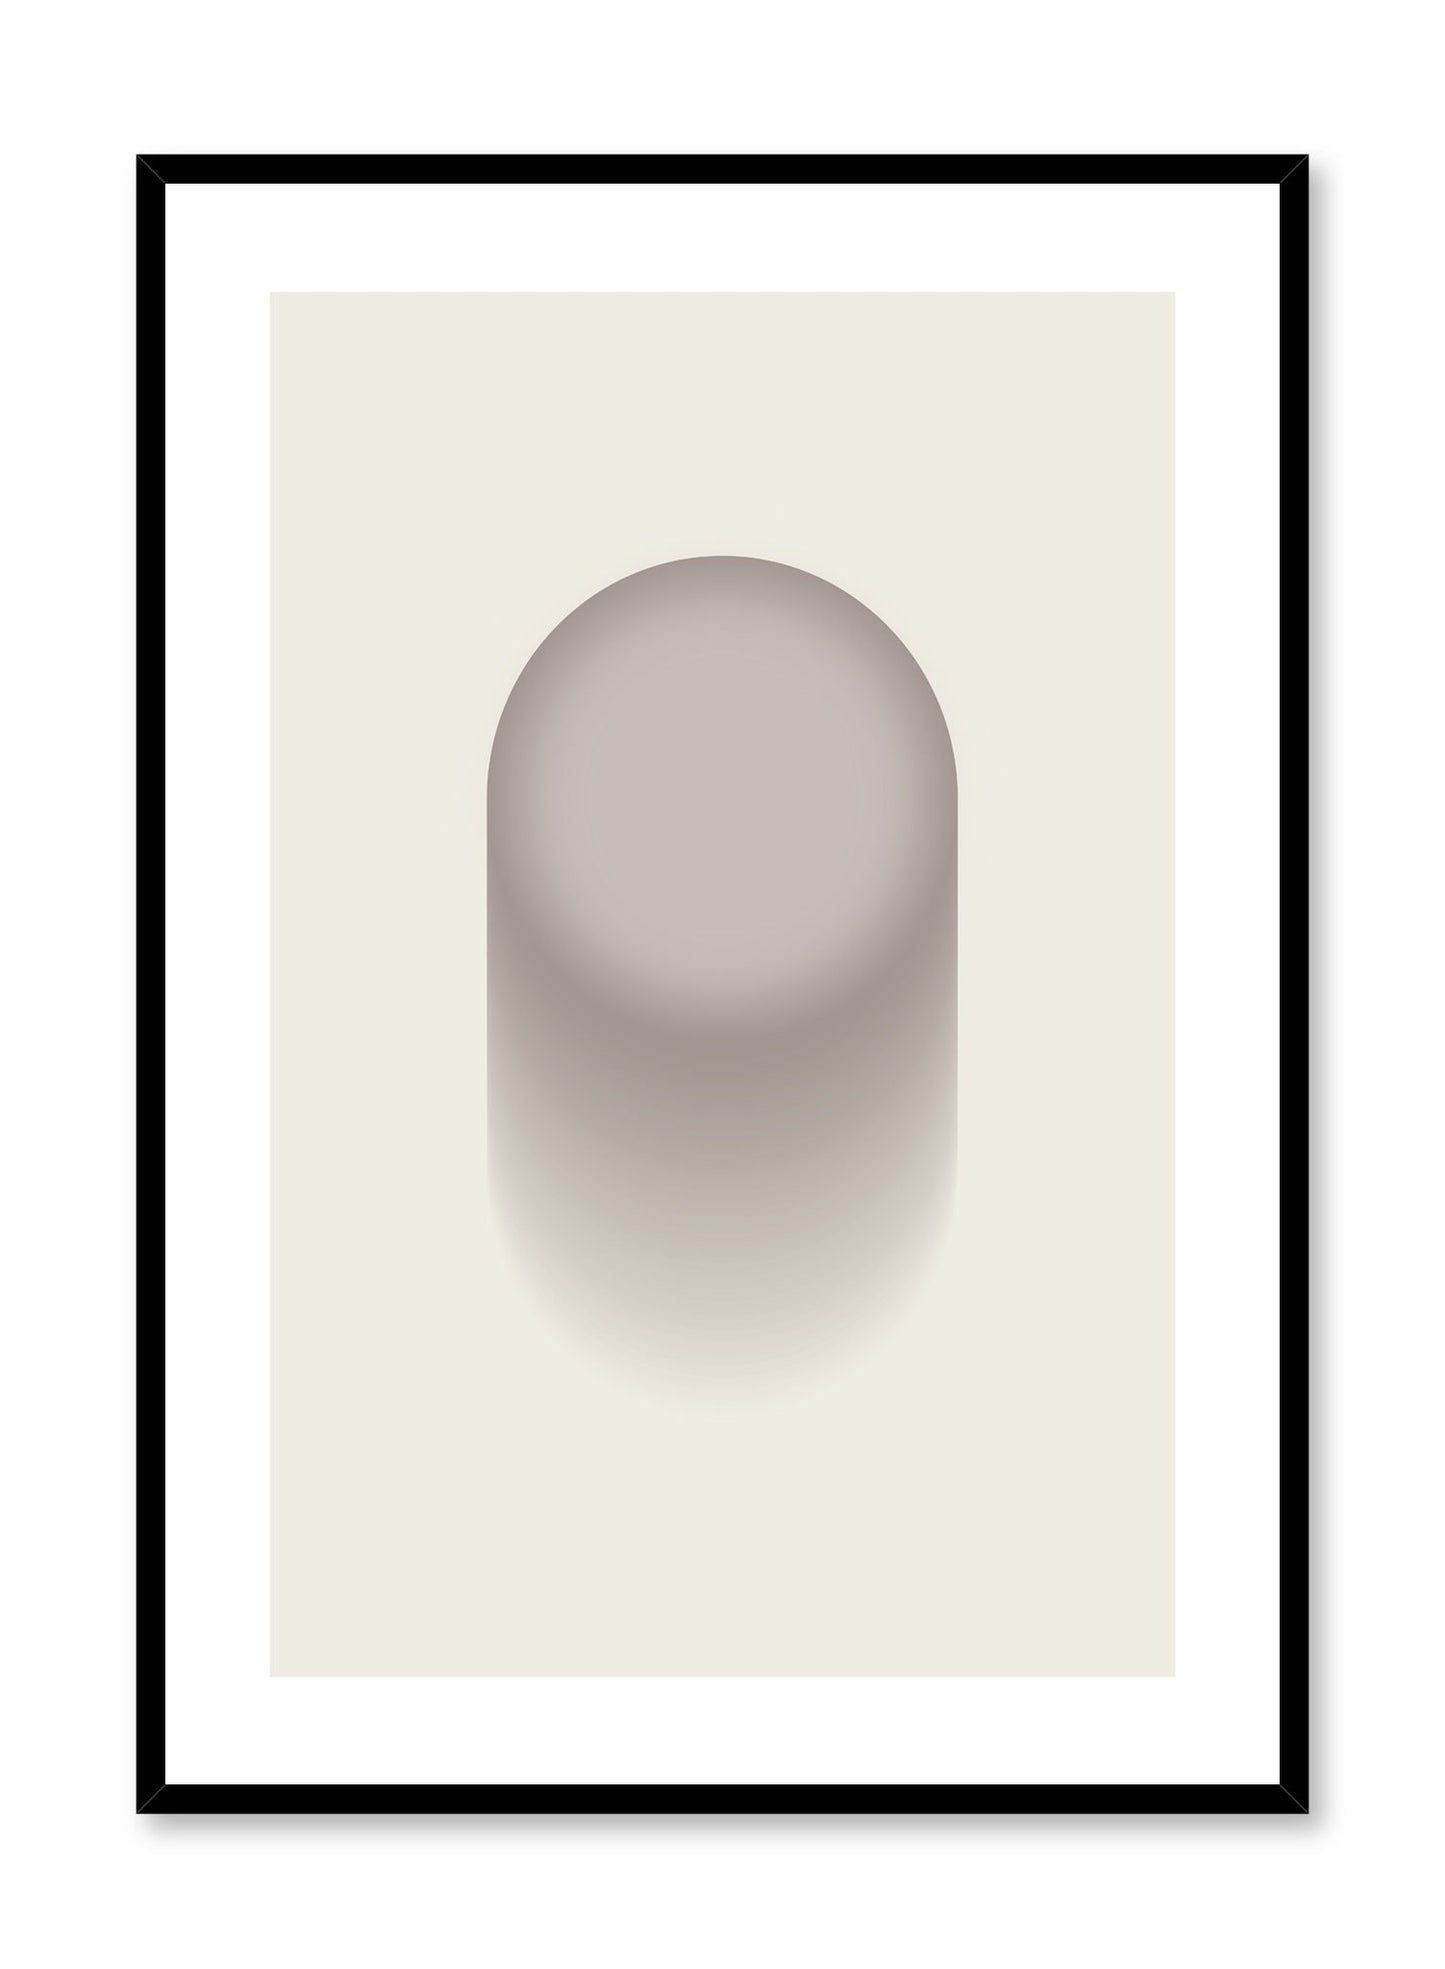 Minimalist design poster by Opposite Wall with Switch abstract graphic design of beige switch oval